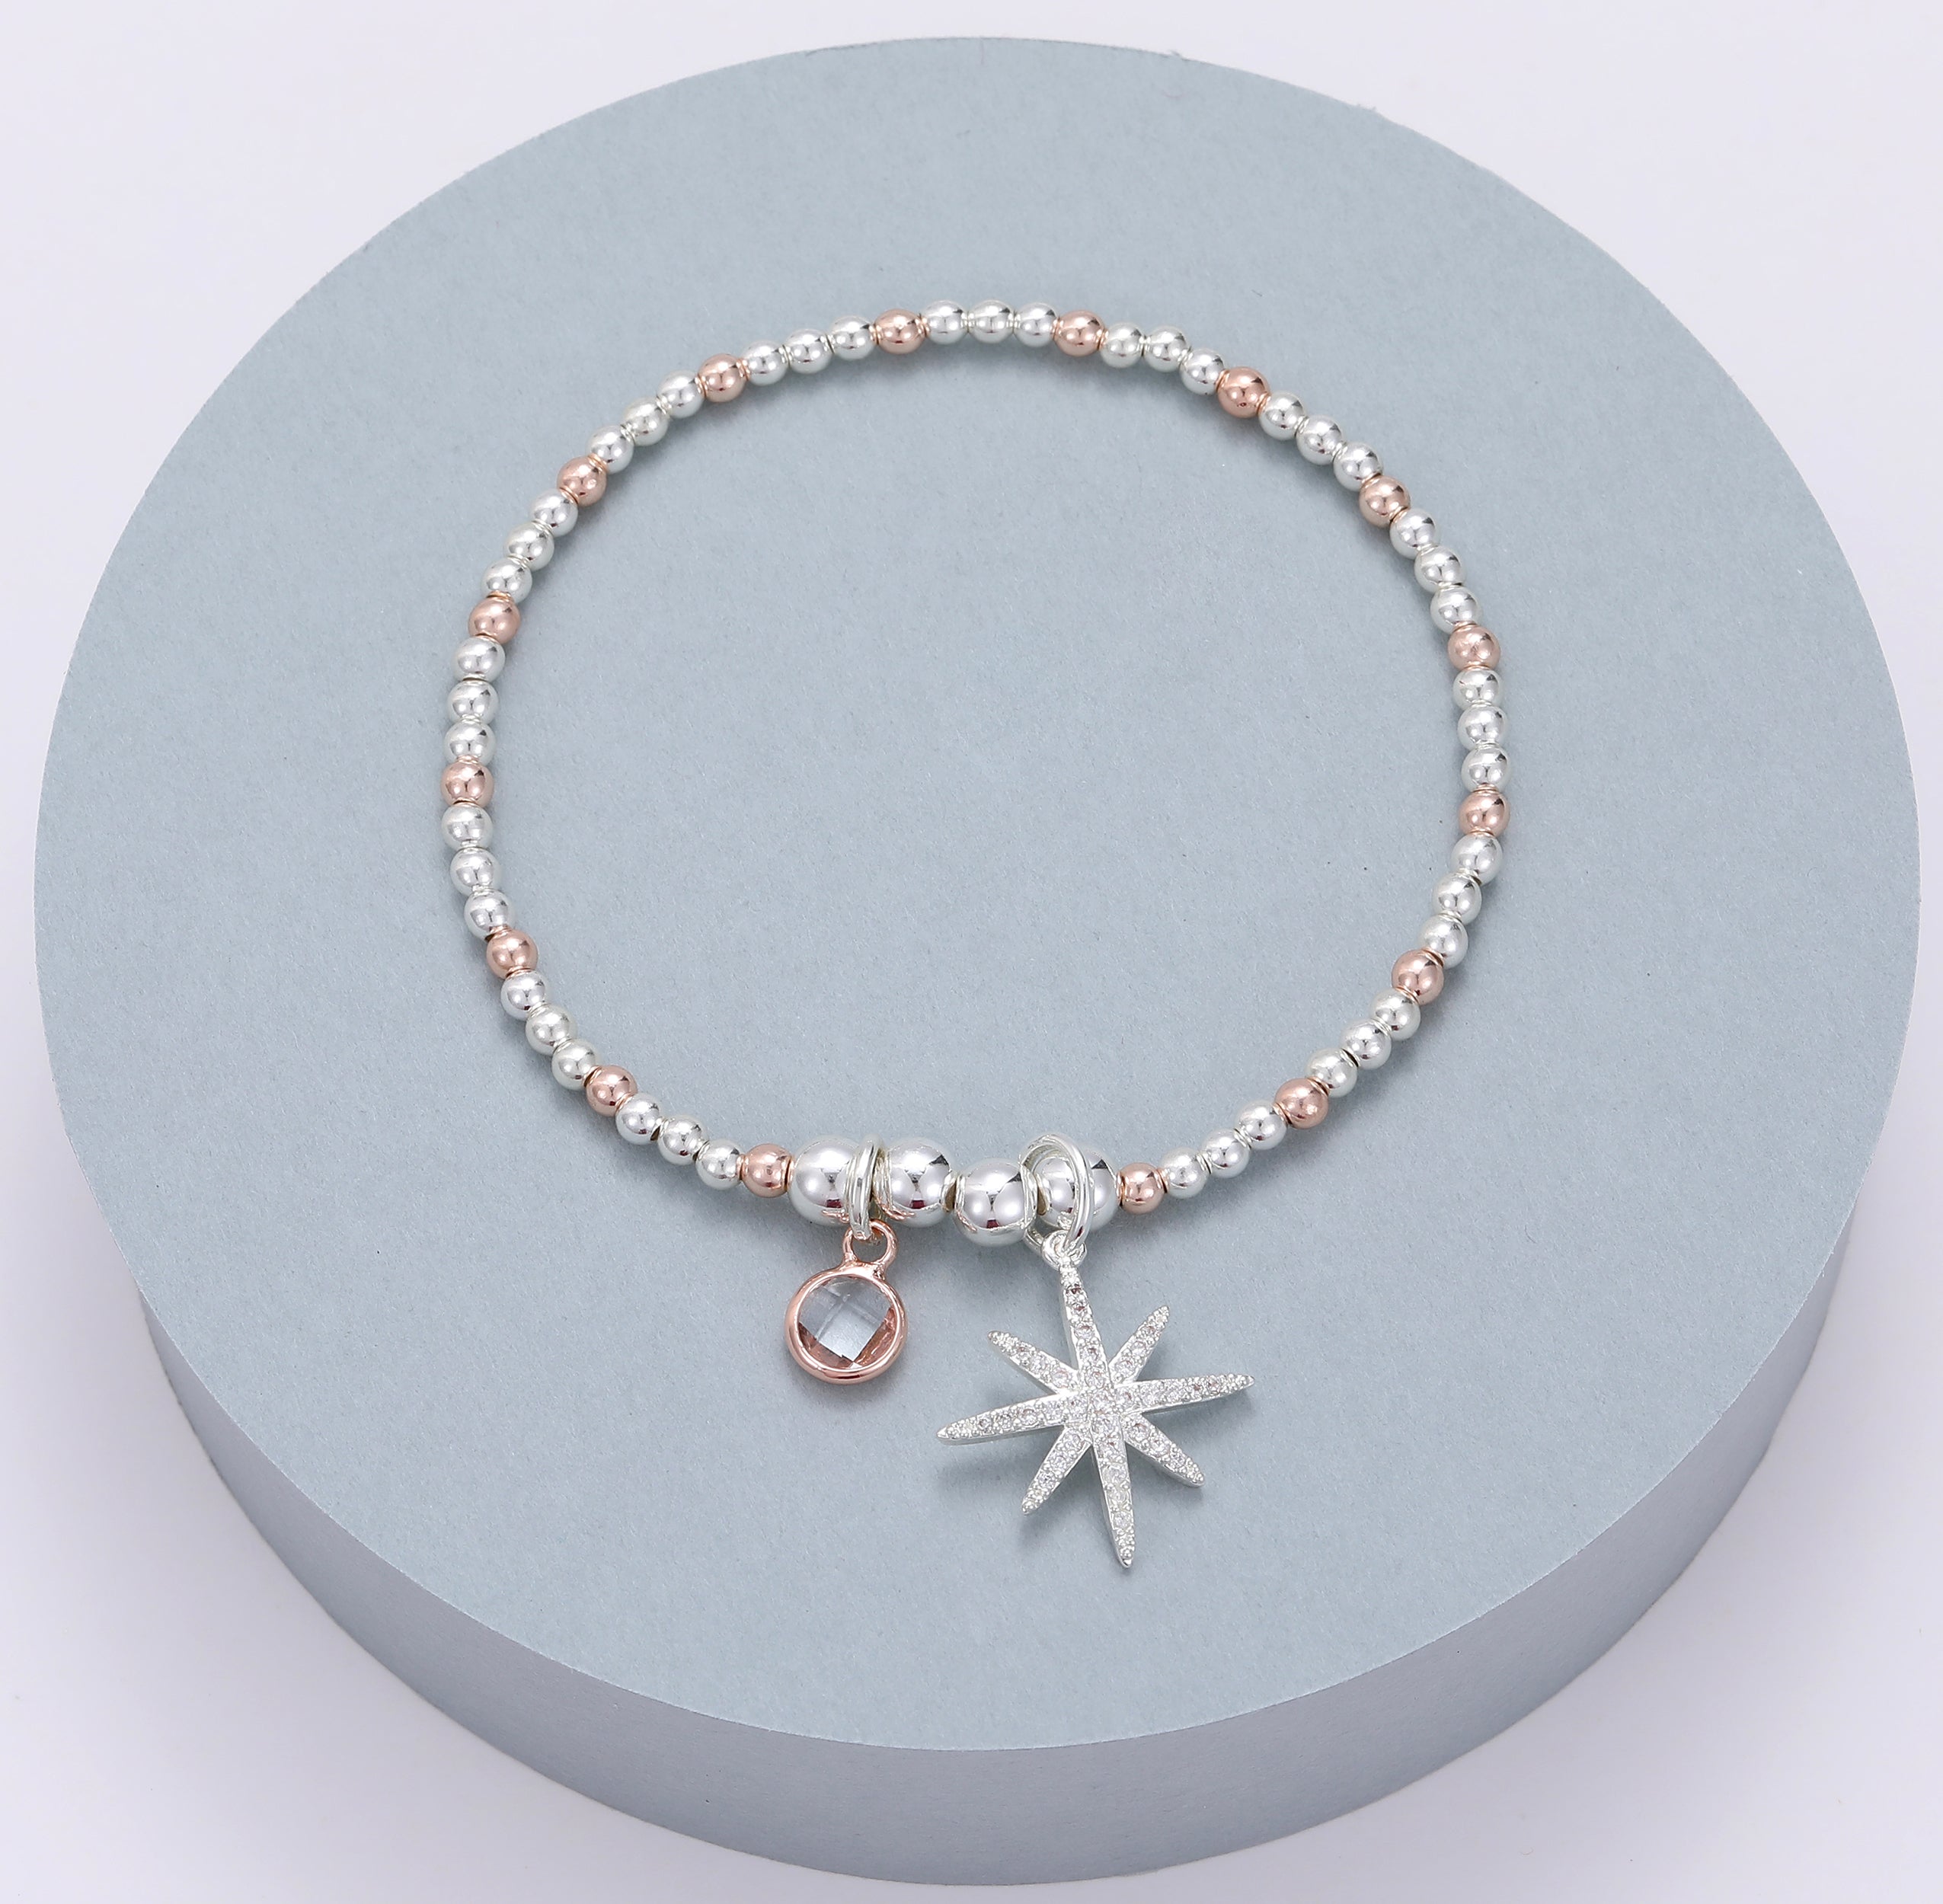 Elasticated bracelet with silver and rose gold beading and silver diamanté shining star